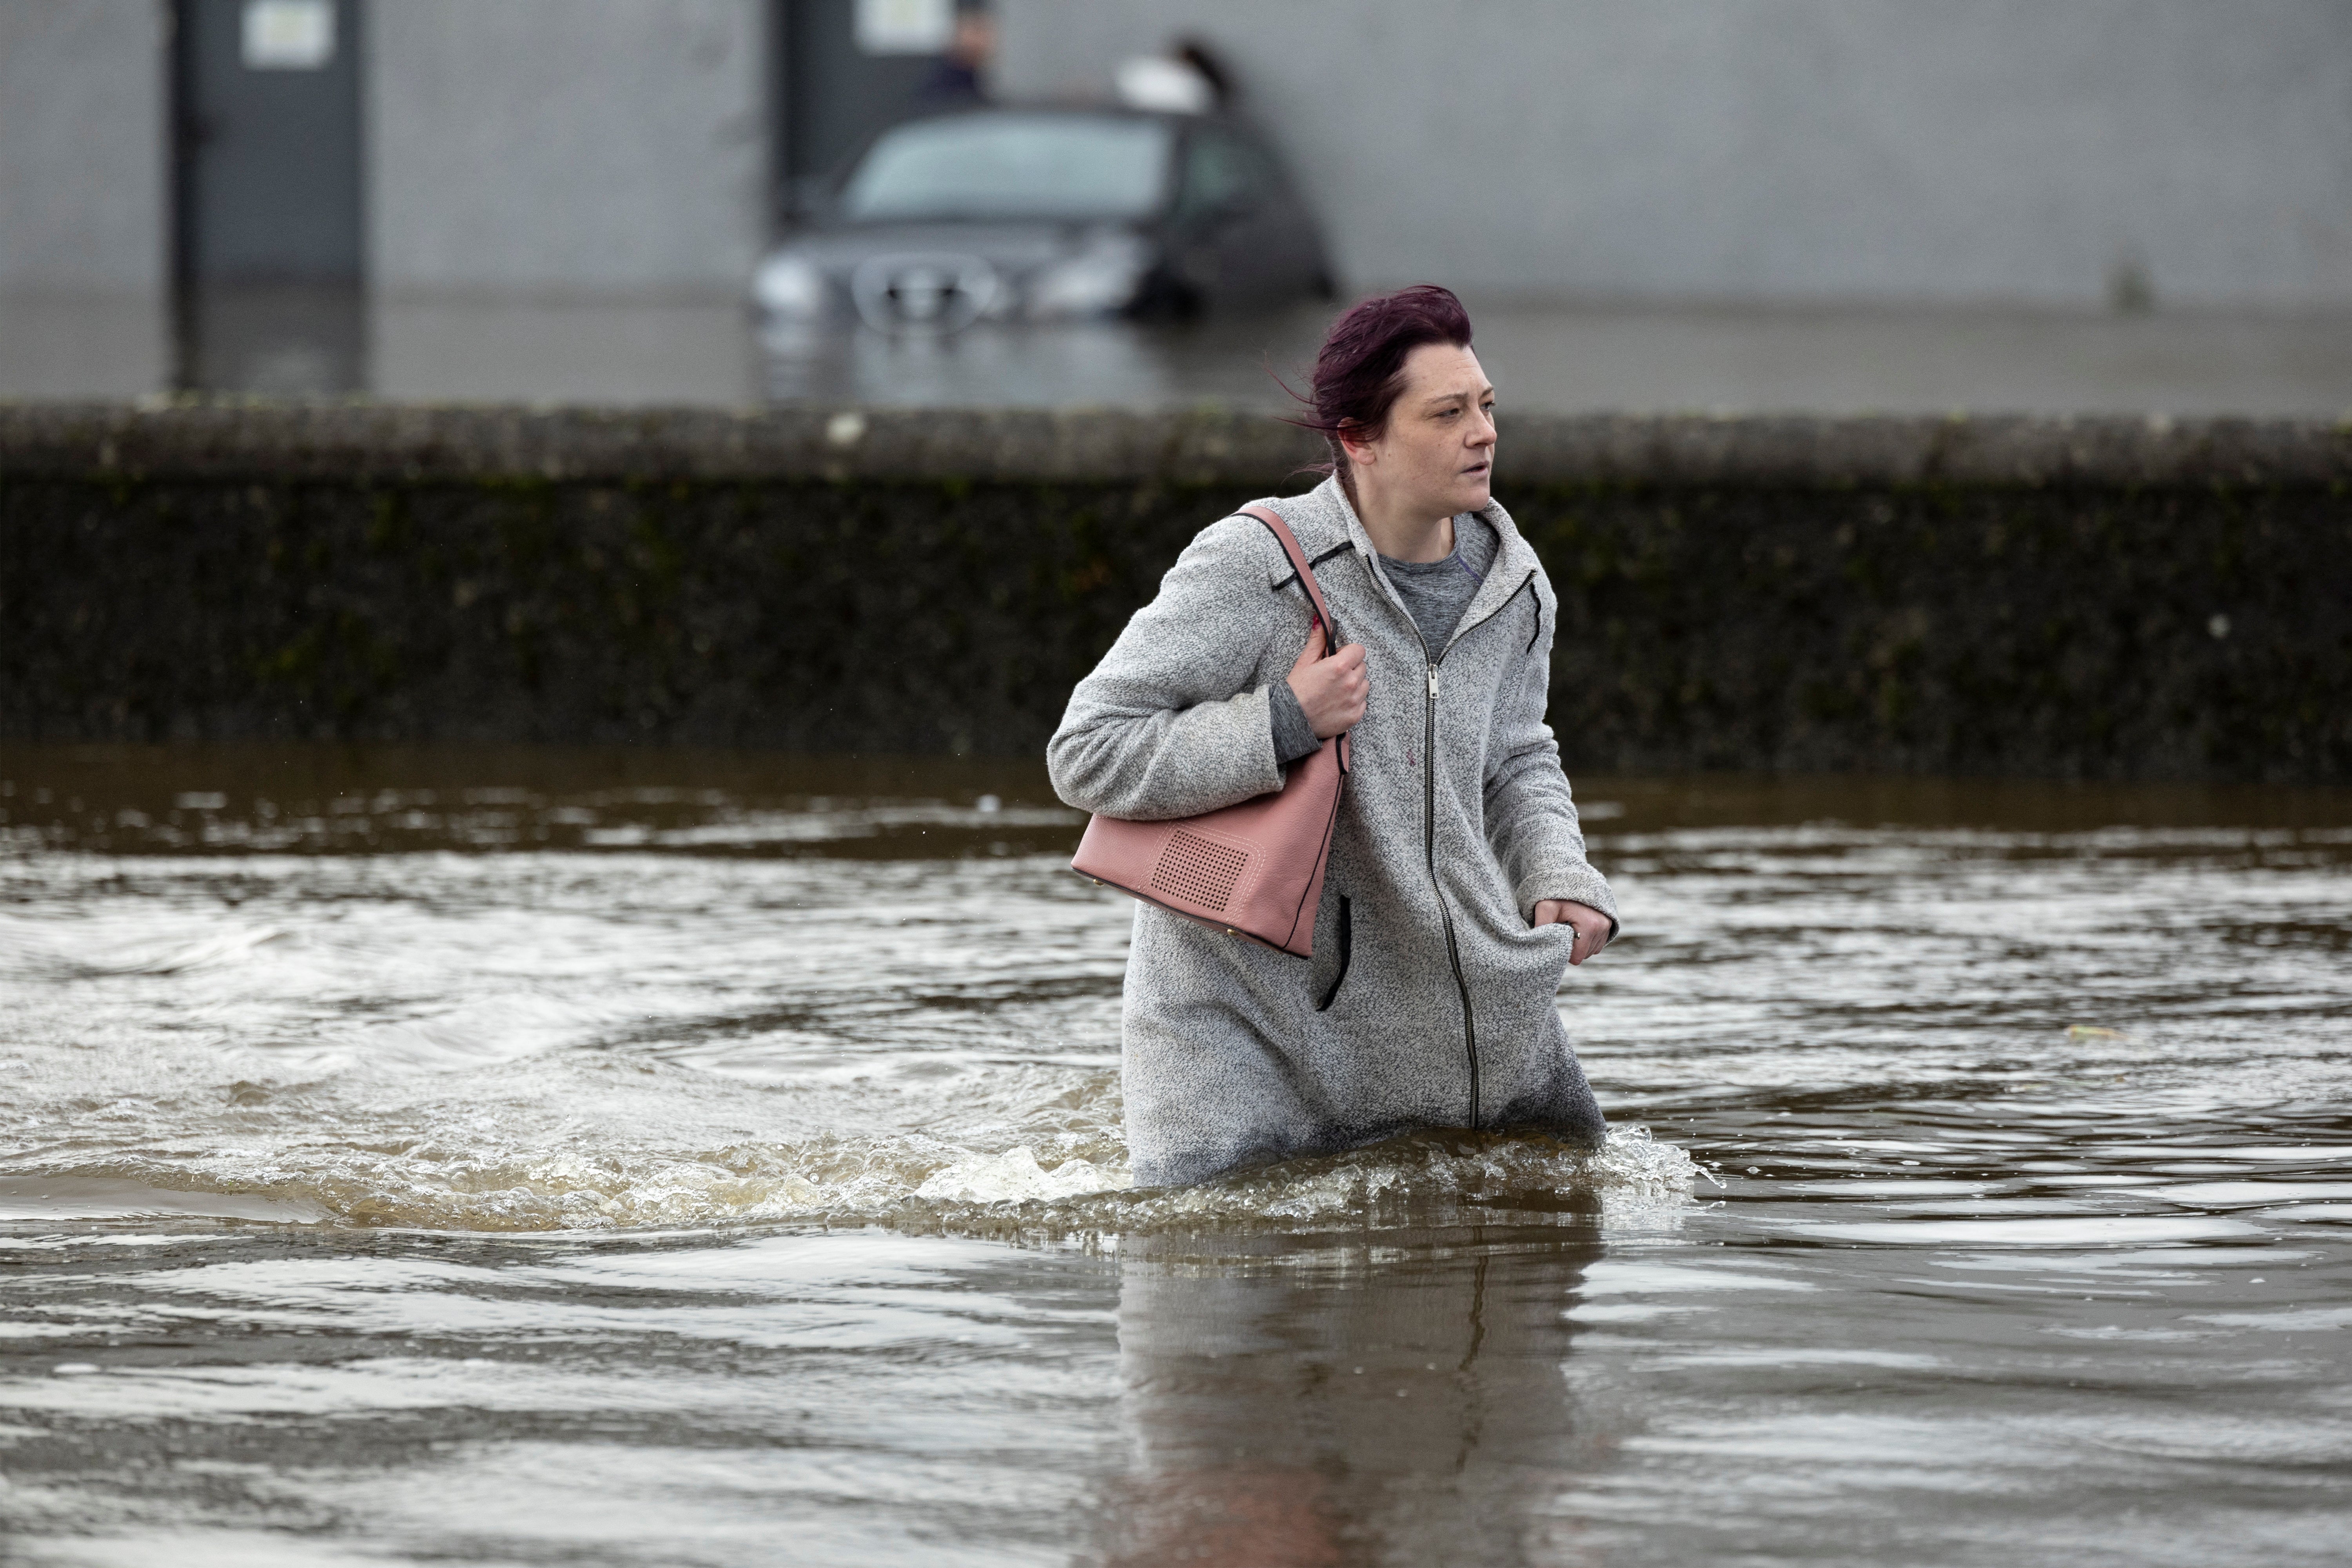 A woman tries to walk through water as it flows through the streets after heavy rain caused extensive flooding in Ireland